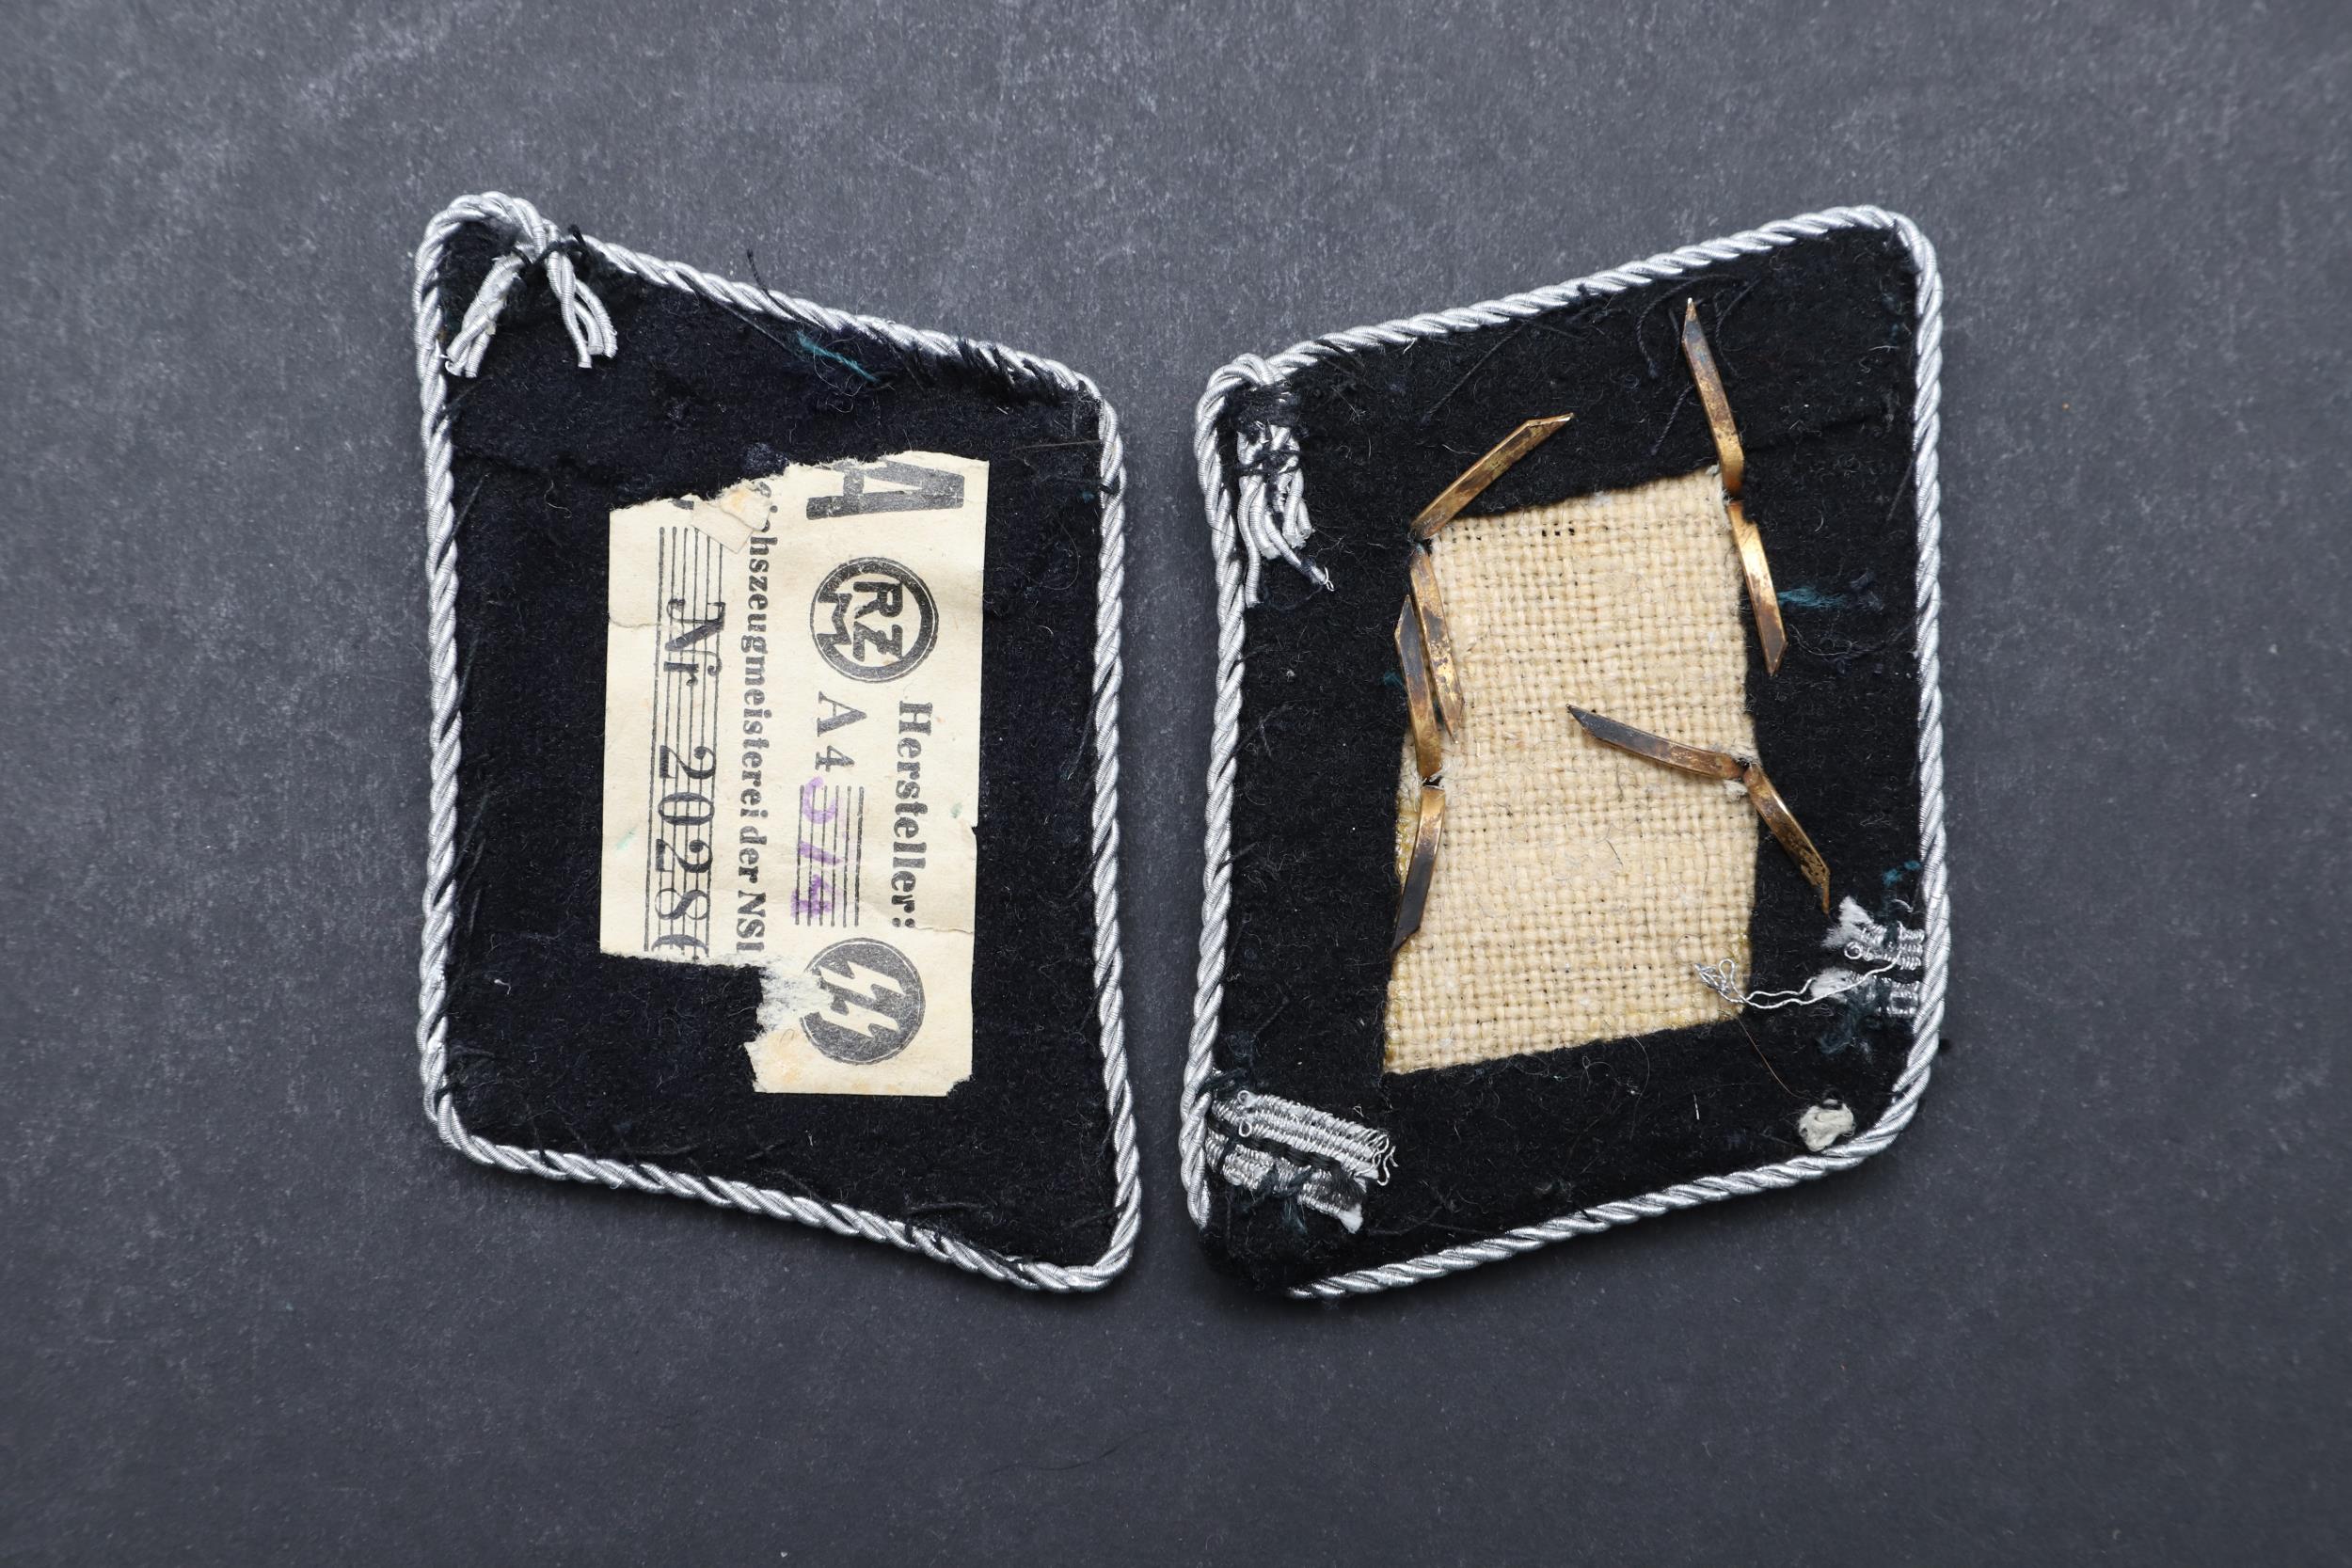 A PAIR OF SECOND WORLD WAR GERMAN SS OFFICER'S COLLAR PATCHES. - Image 4 of 4